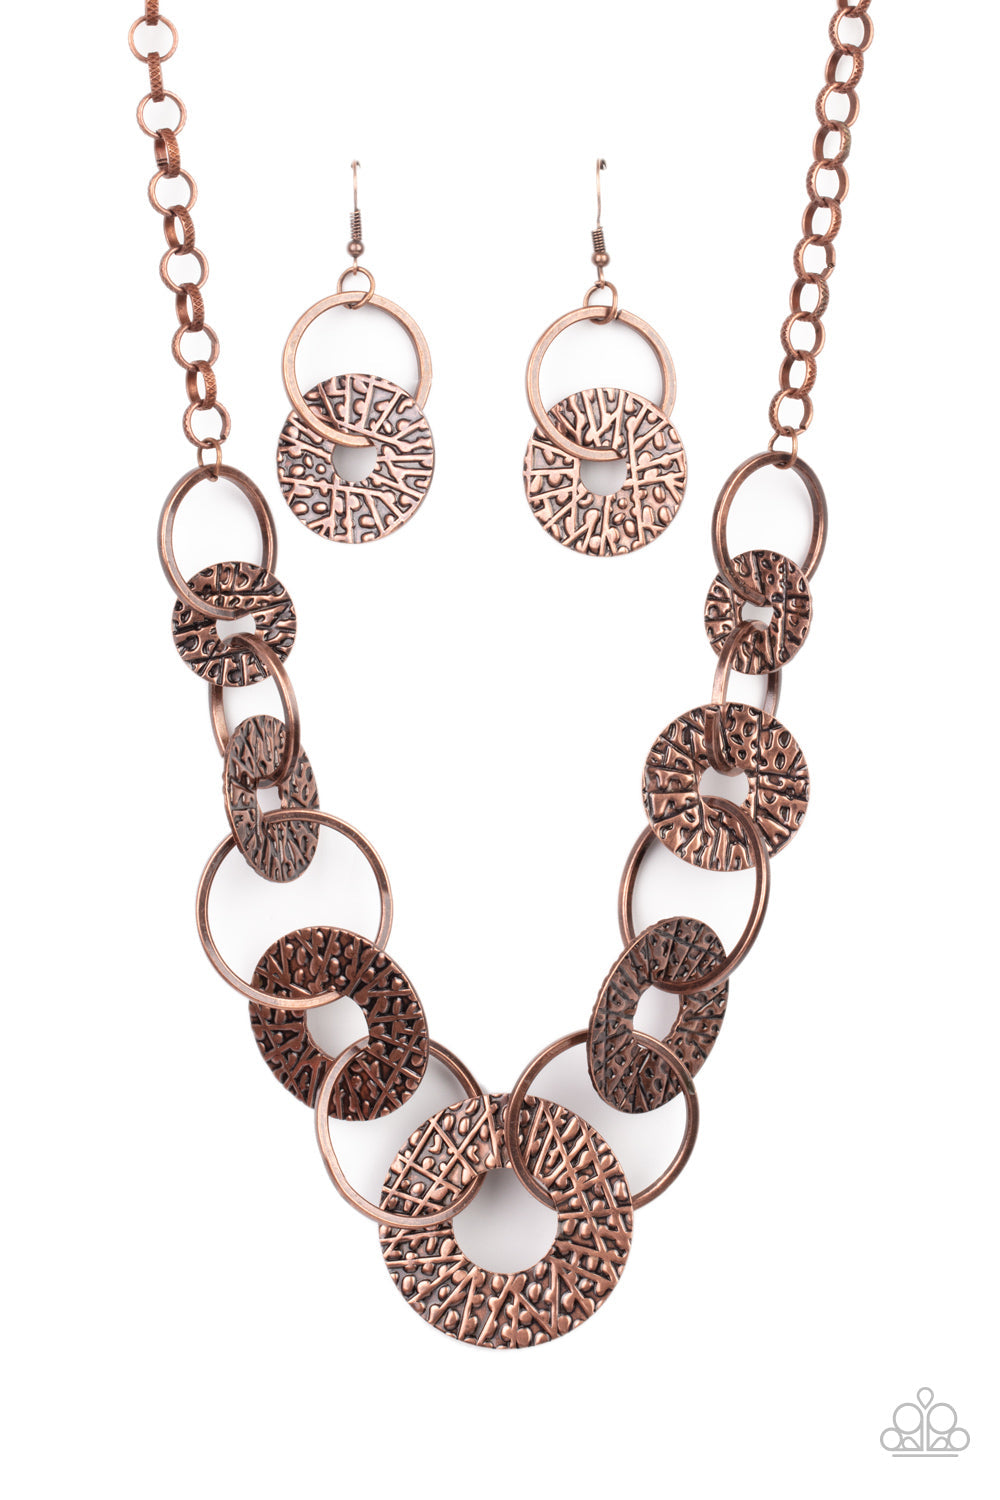 ​Industrial Envy - Copper Necklace - Paparazzi Accessories - Gradually increasing in size near the center, a collection of antiqued copper rings and abstract hammered discs interlock below the collar for an intense industrial look. Features an adjustable clasp closure. Sold as one individual necklace. Includes one pair of matching earrings.